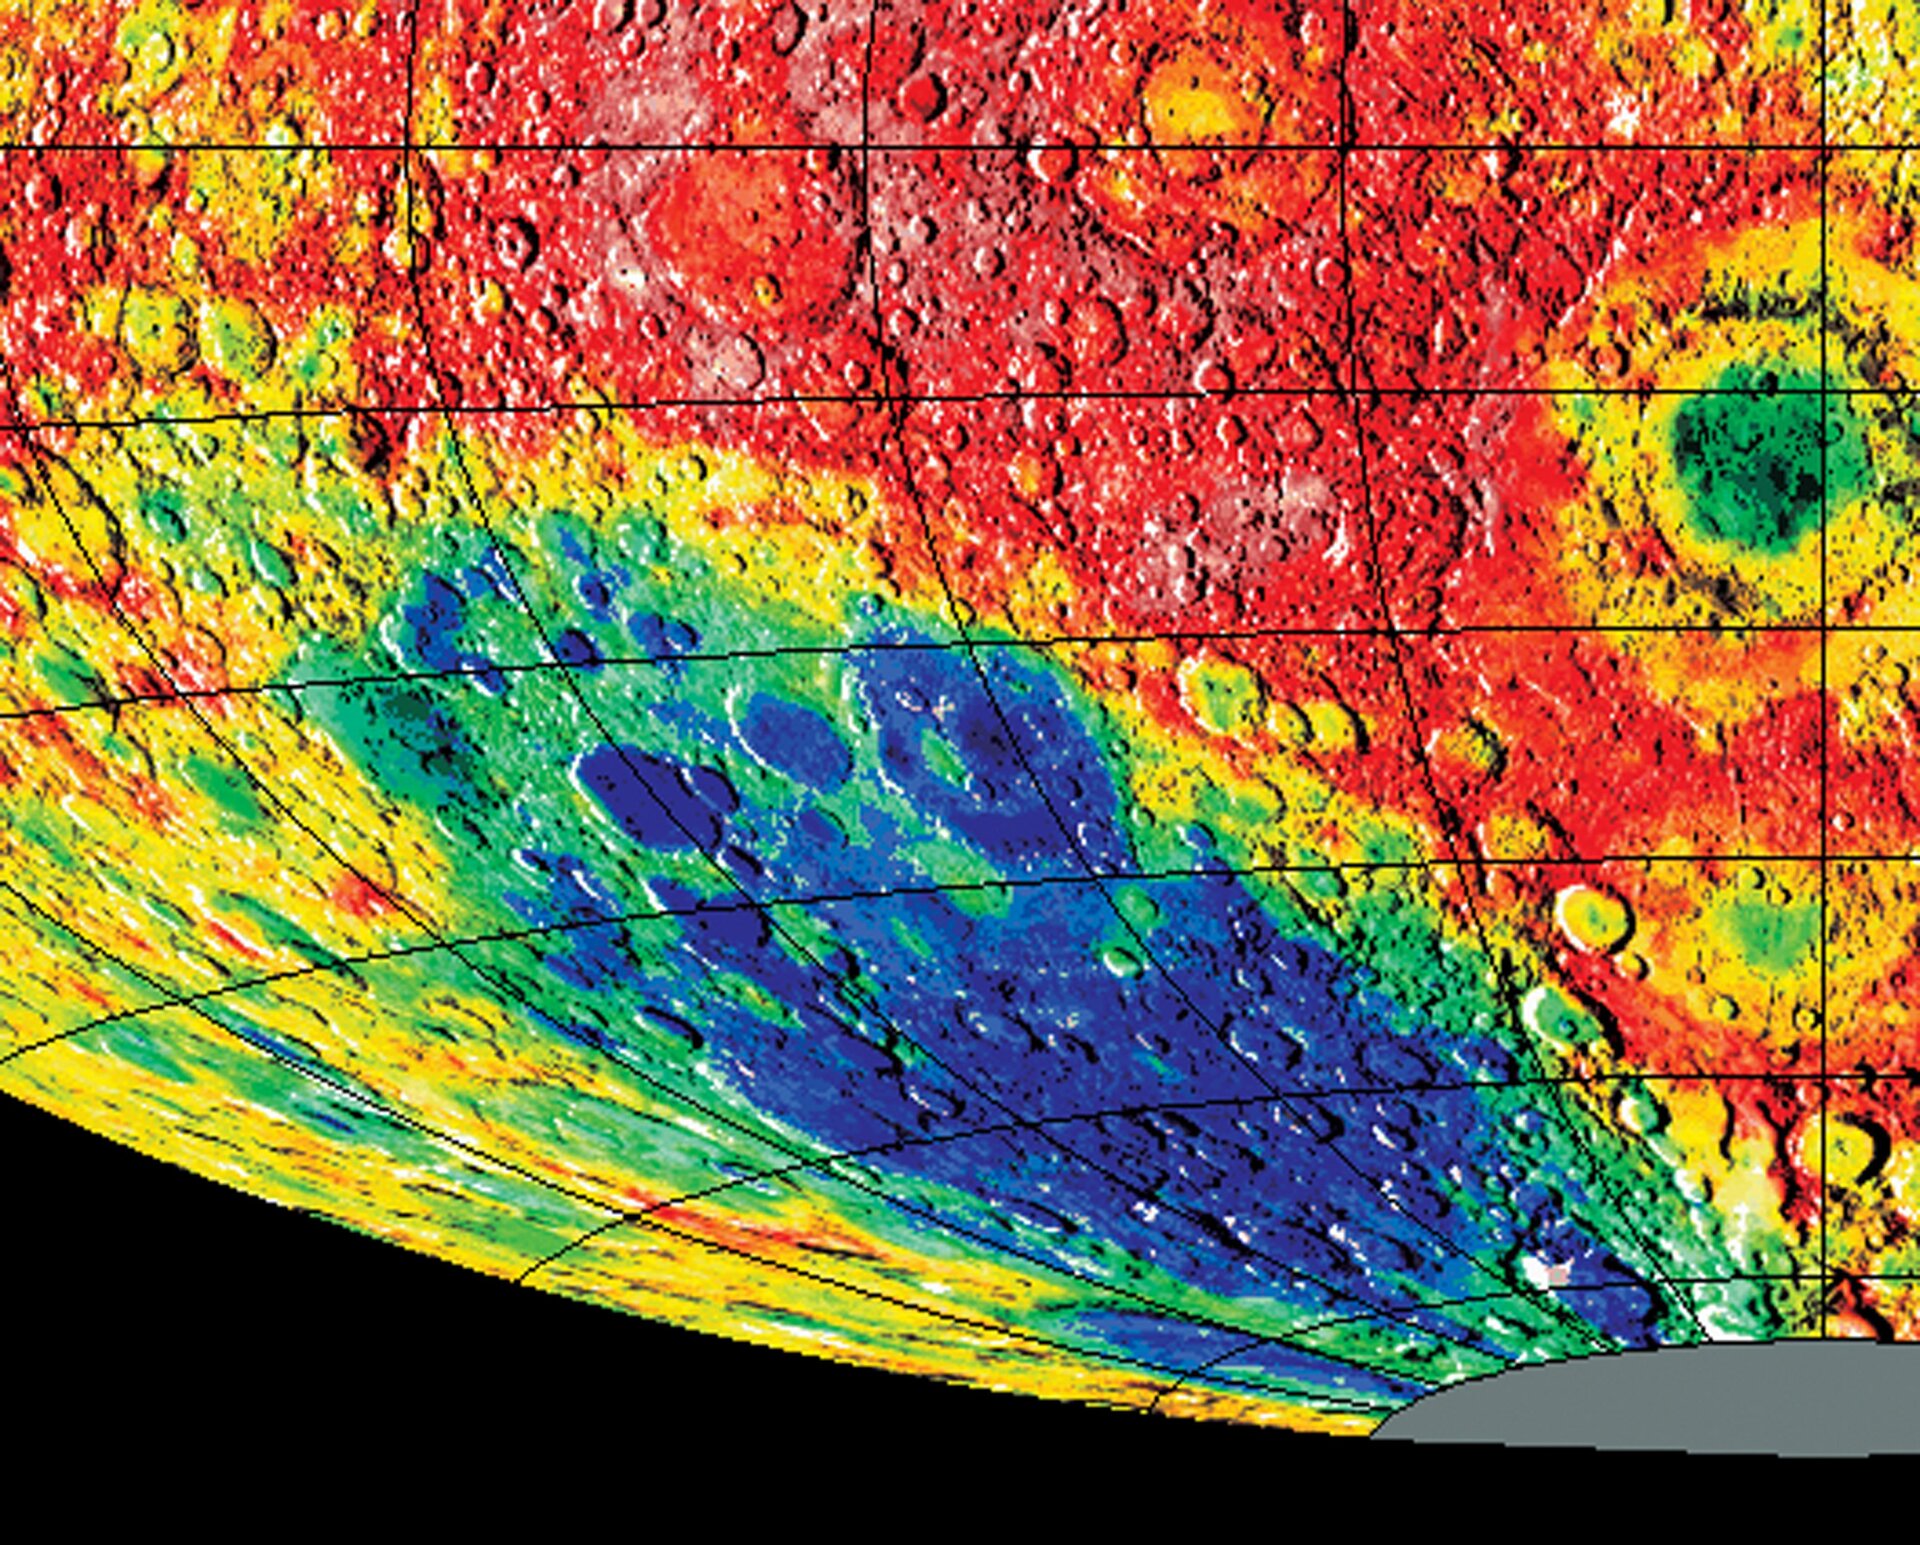 Near the Moon's south pole is the South Pole - Aitken Basin, the largest known impact crater in the entire Solar System